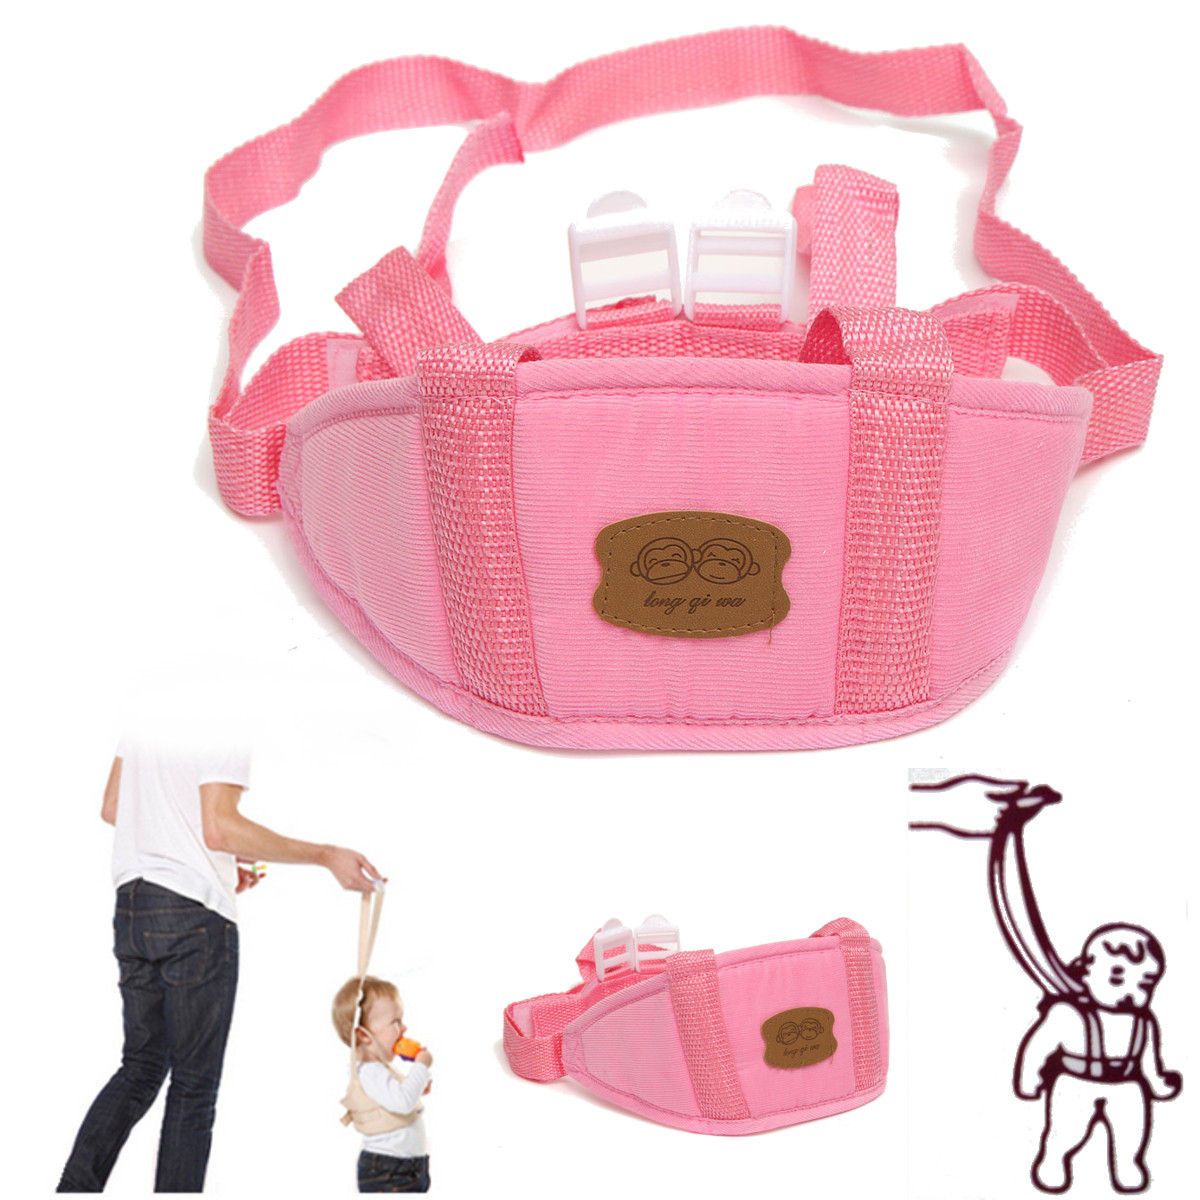 

Baby Toddler Walking Wings Belt Safety Harness Strap Learning Walk Assistant